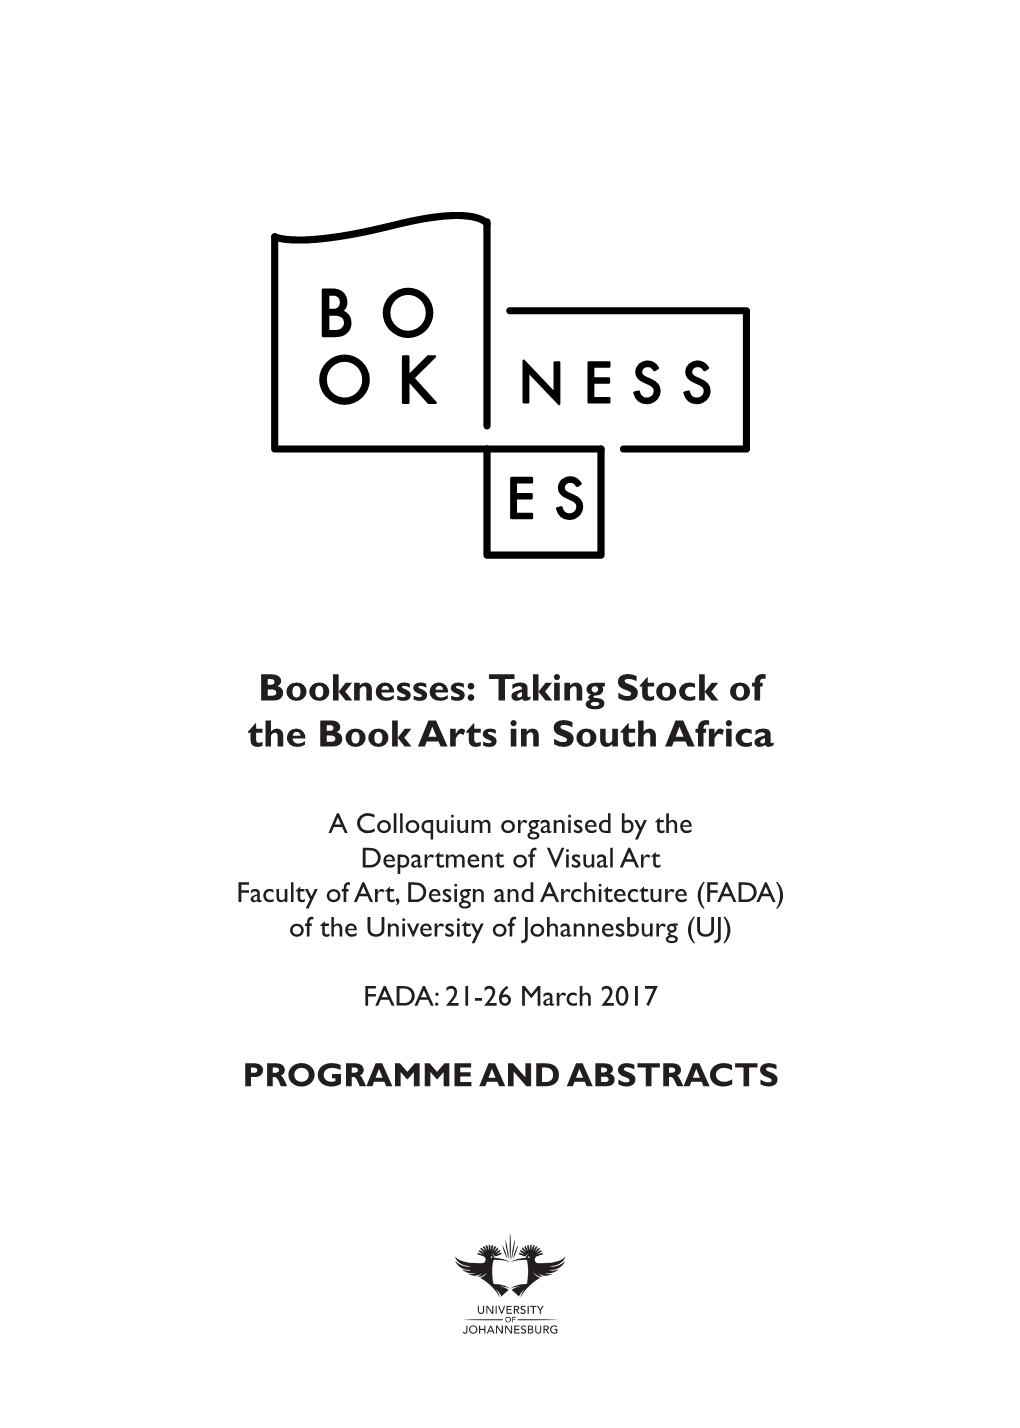 Booknesses: Taking Stock of the Book Arts in South Africa